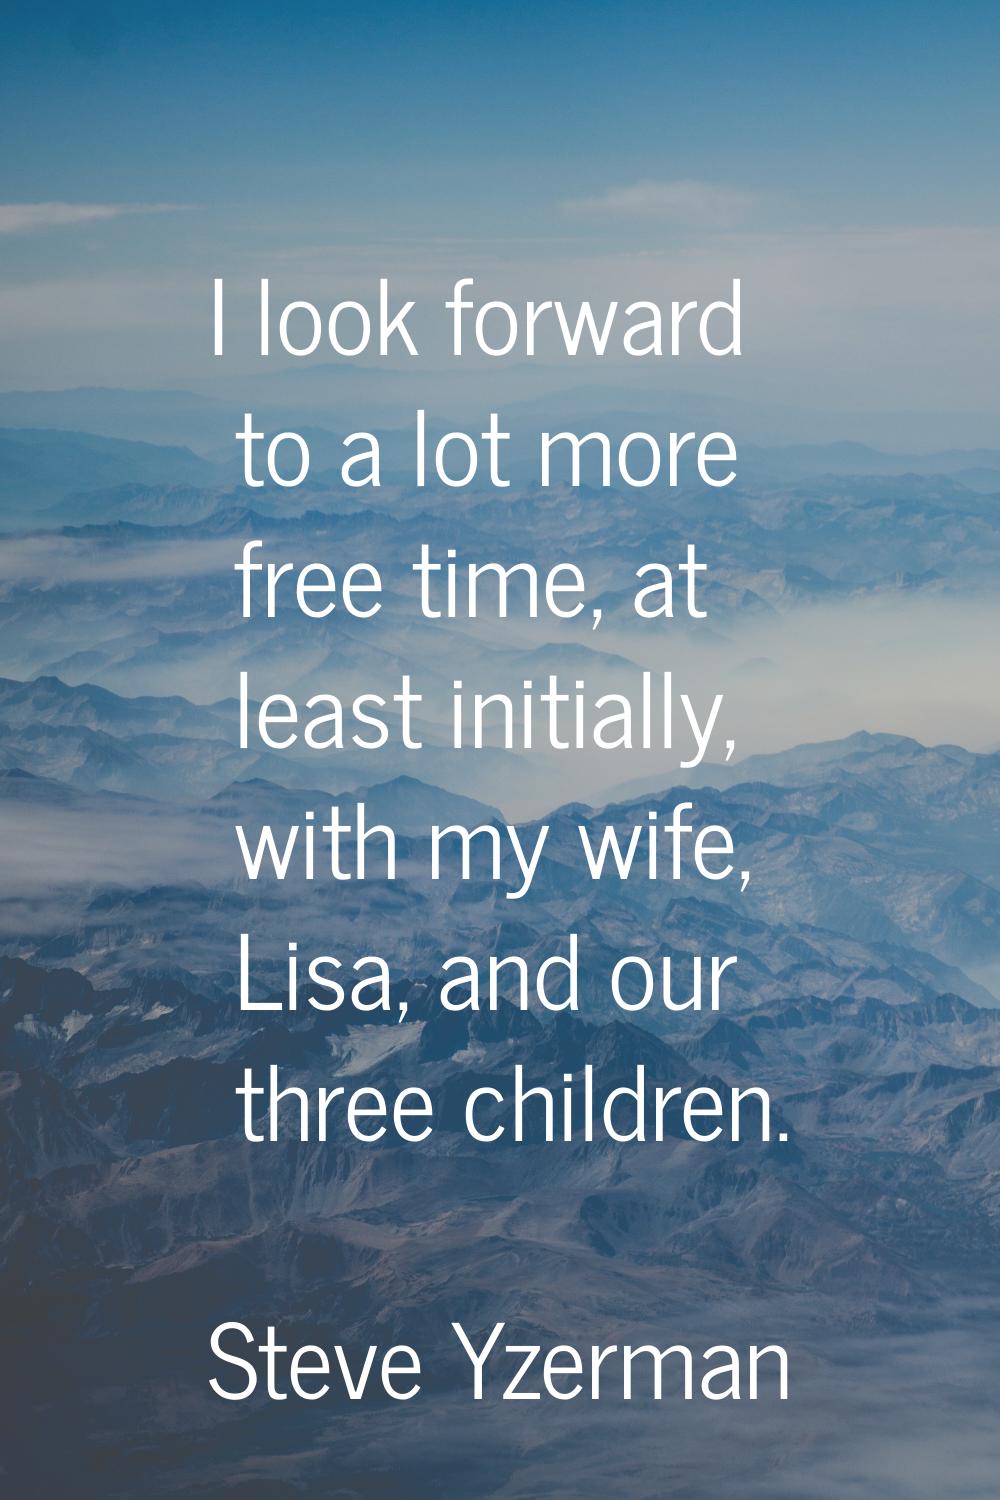 I look forward to a lot more free time, at least initially, with my wife, Lisa, and our three child